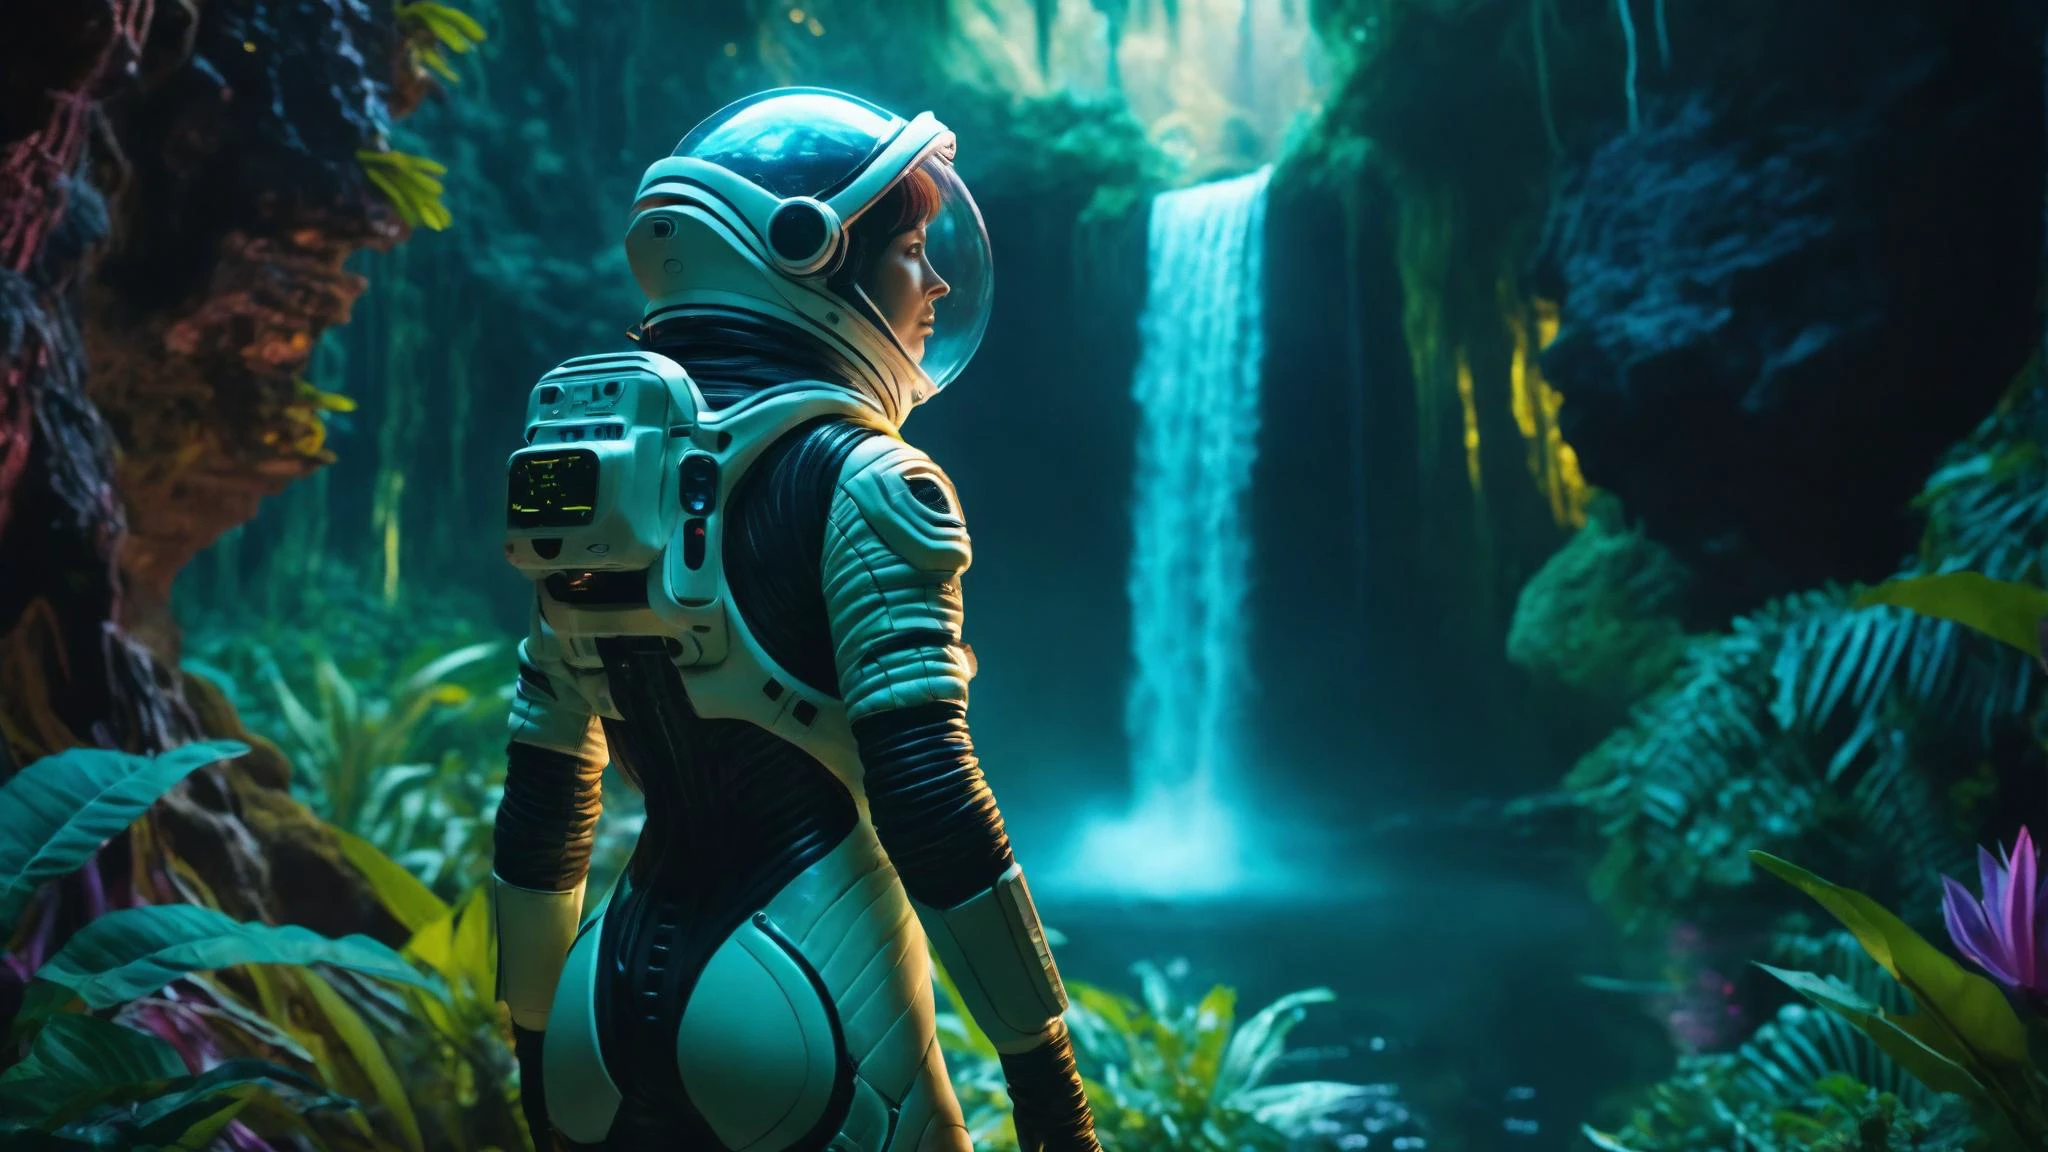 analog photography, female astronaut wearing a futuristic skintight sci-fi spacesuit standing on an alien planet looking at a lush, glowing bioluminescent alien landscape, large luminous plants, bioluminescent jungle, waterfall,  luminous flying animals, shot from behind , 8k resolution, highres, high detail, sharp focus, detailed skin,  8k uhd,  